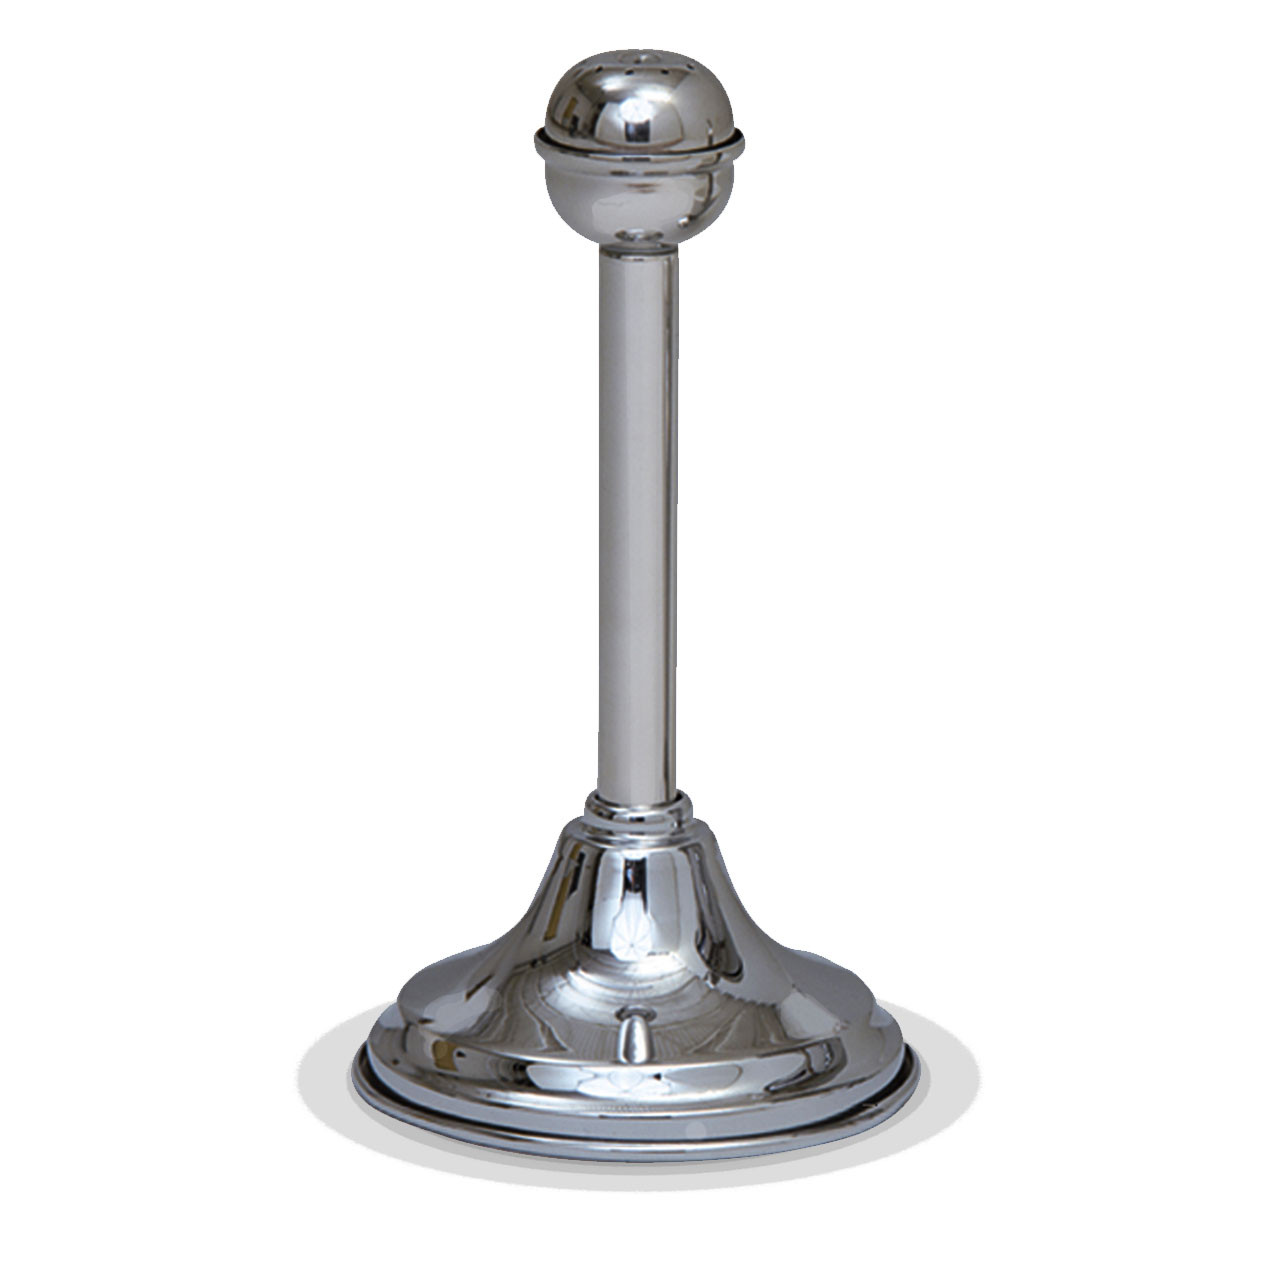 K406 Holy Water Sprinkler w/Stand - Stainless-Steel